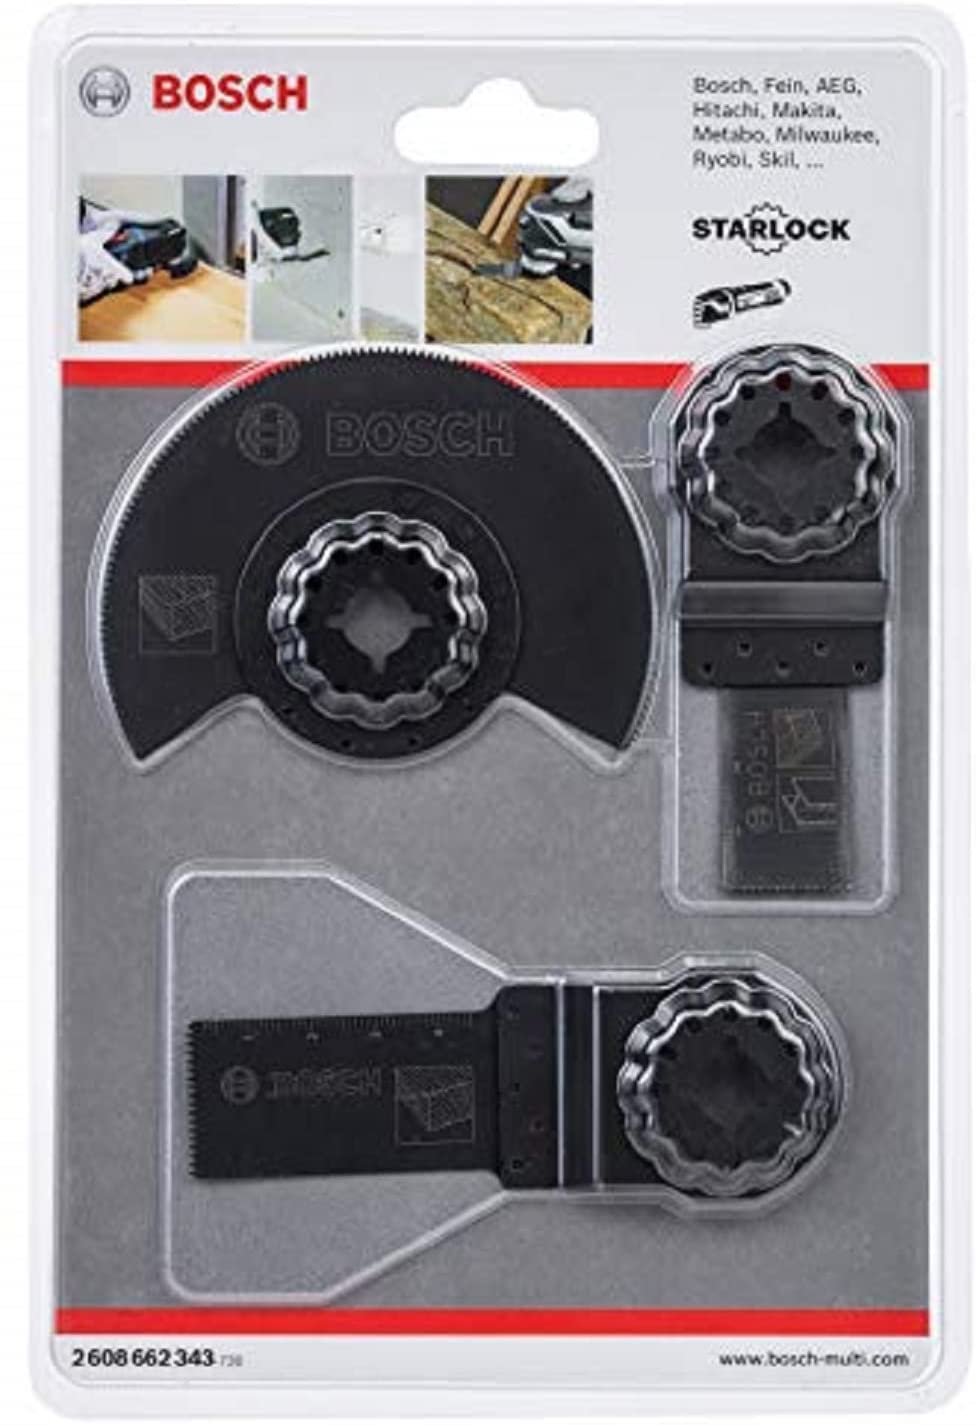 Bosch wood basic set for multifunction tools, saw blade set (3 pieces) 2608662343